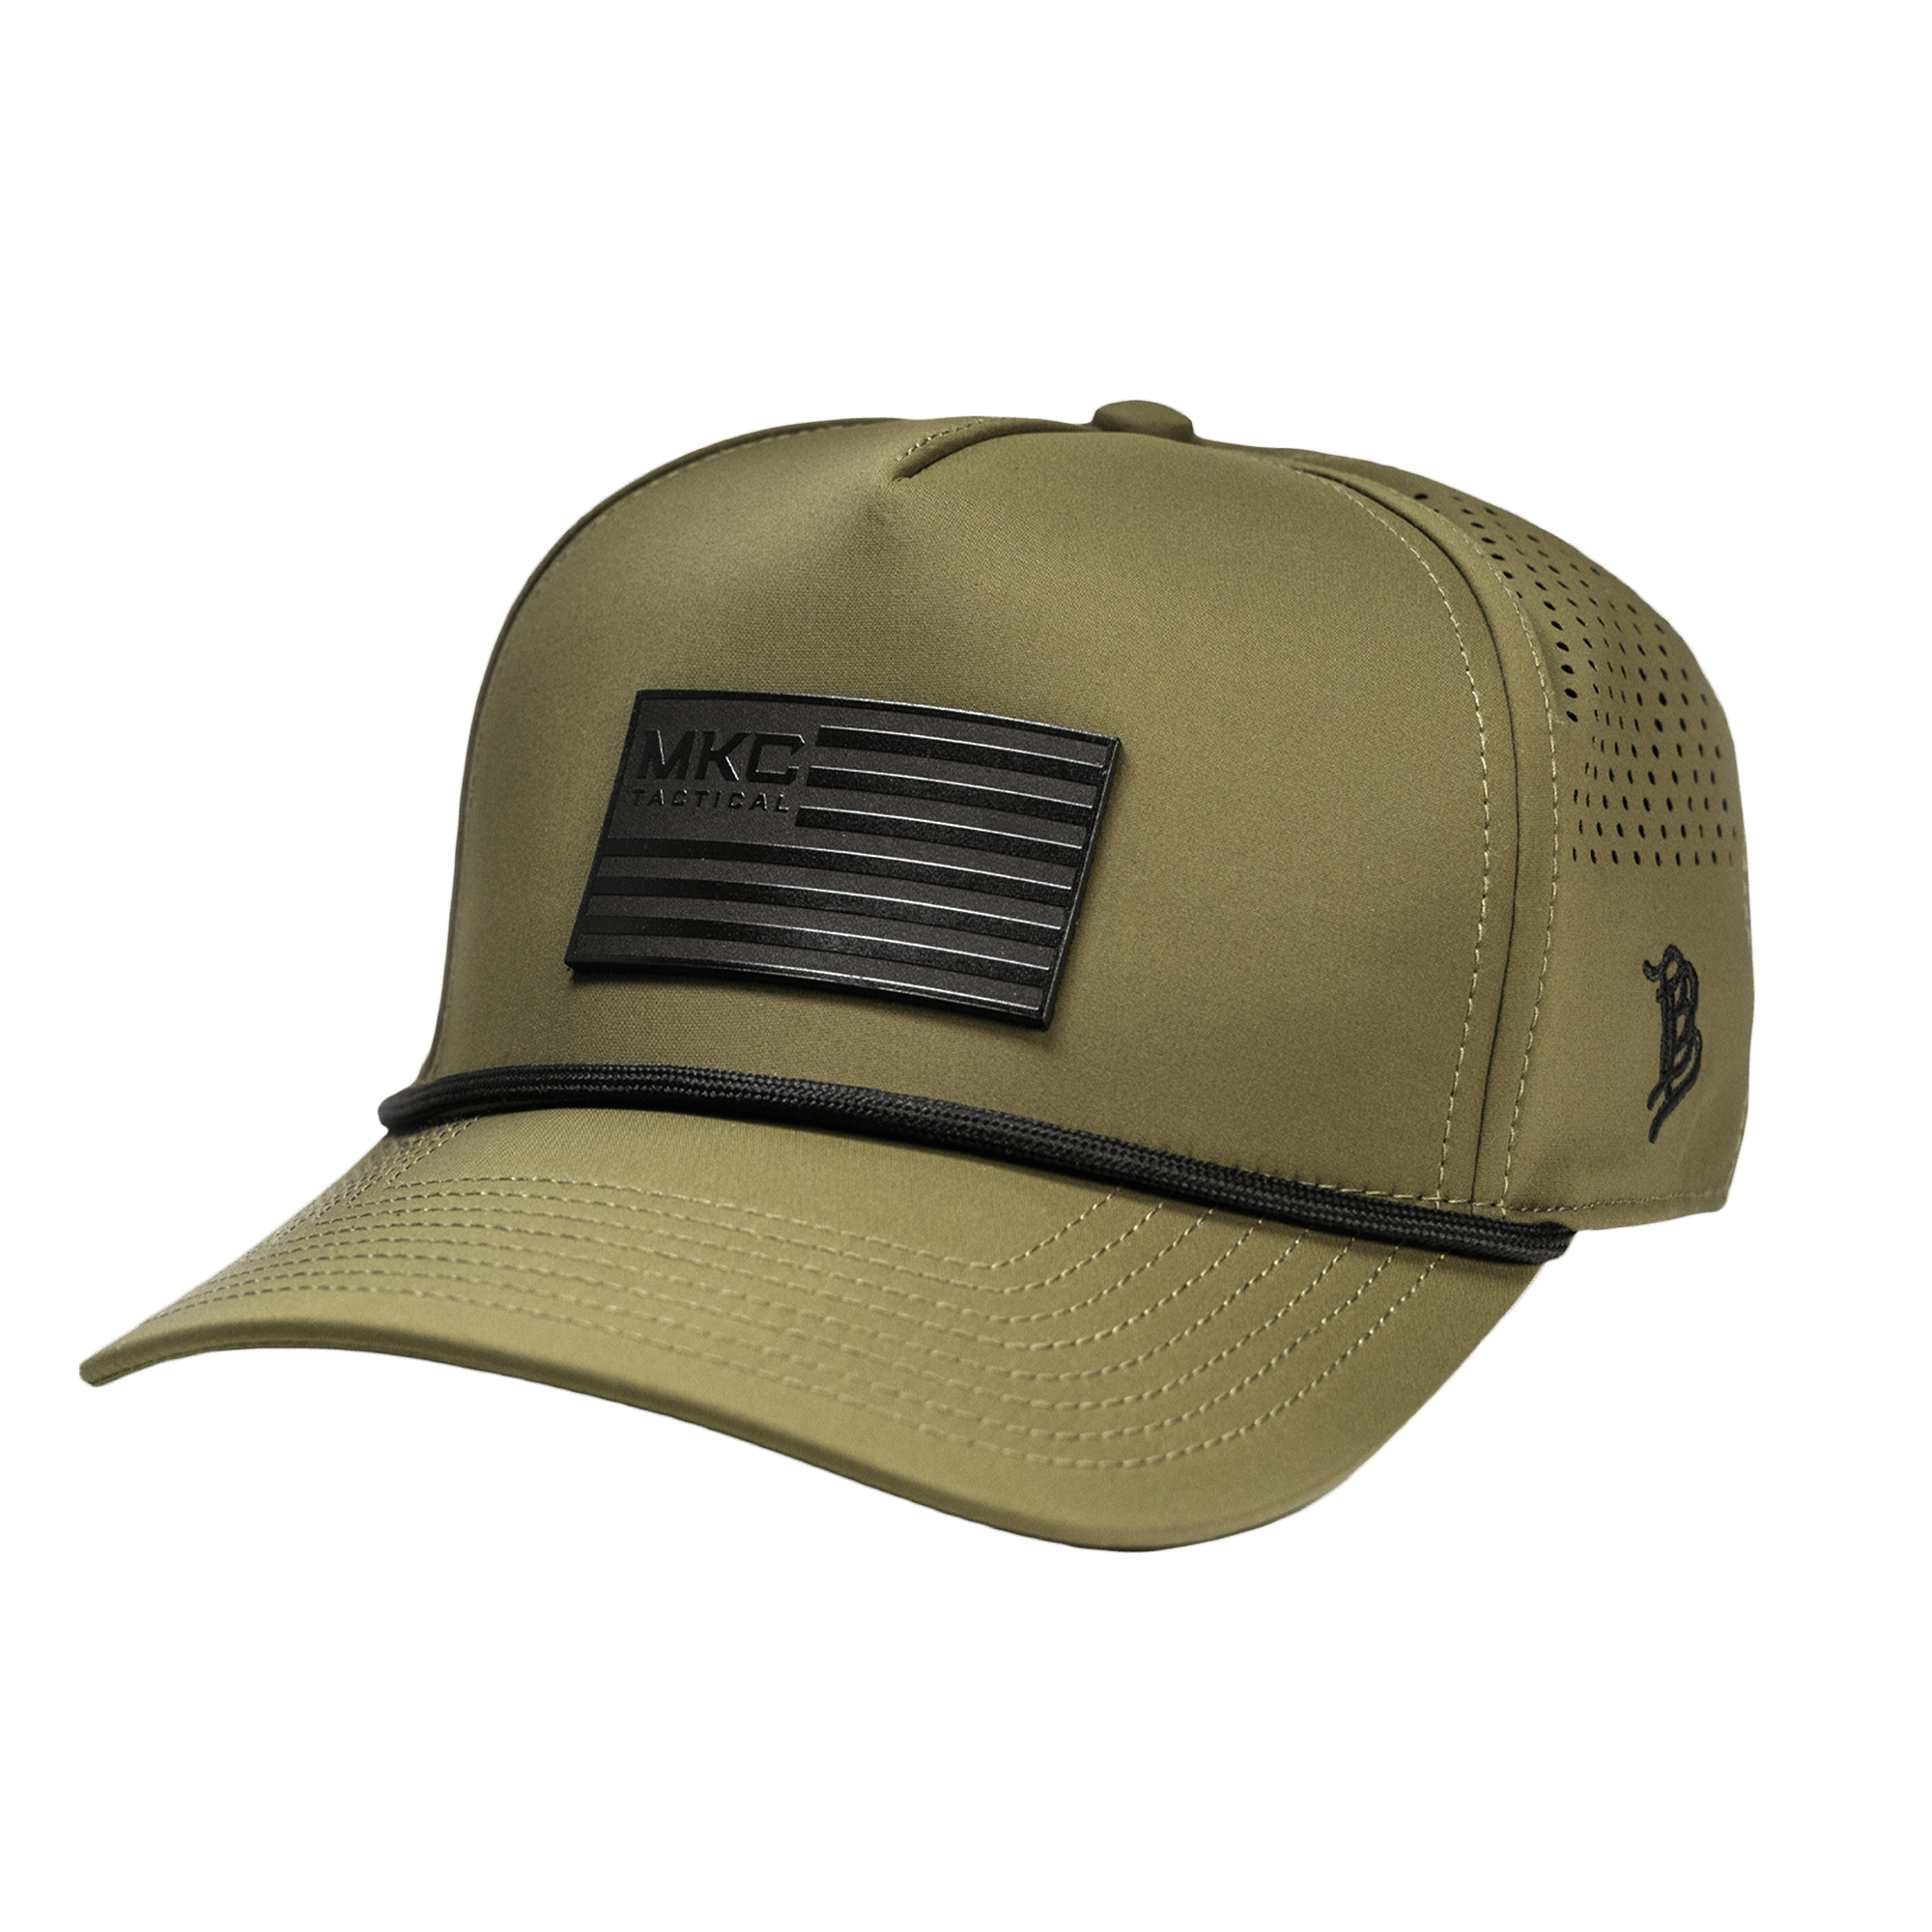 MKC TACTICAL OLD GLORY ROPE HAT - LODEN